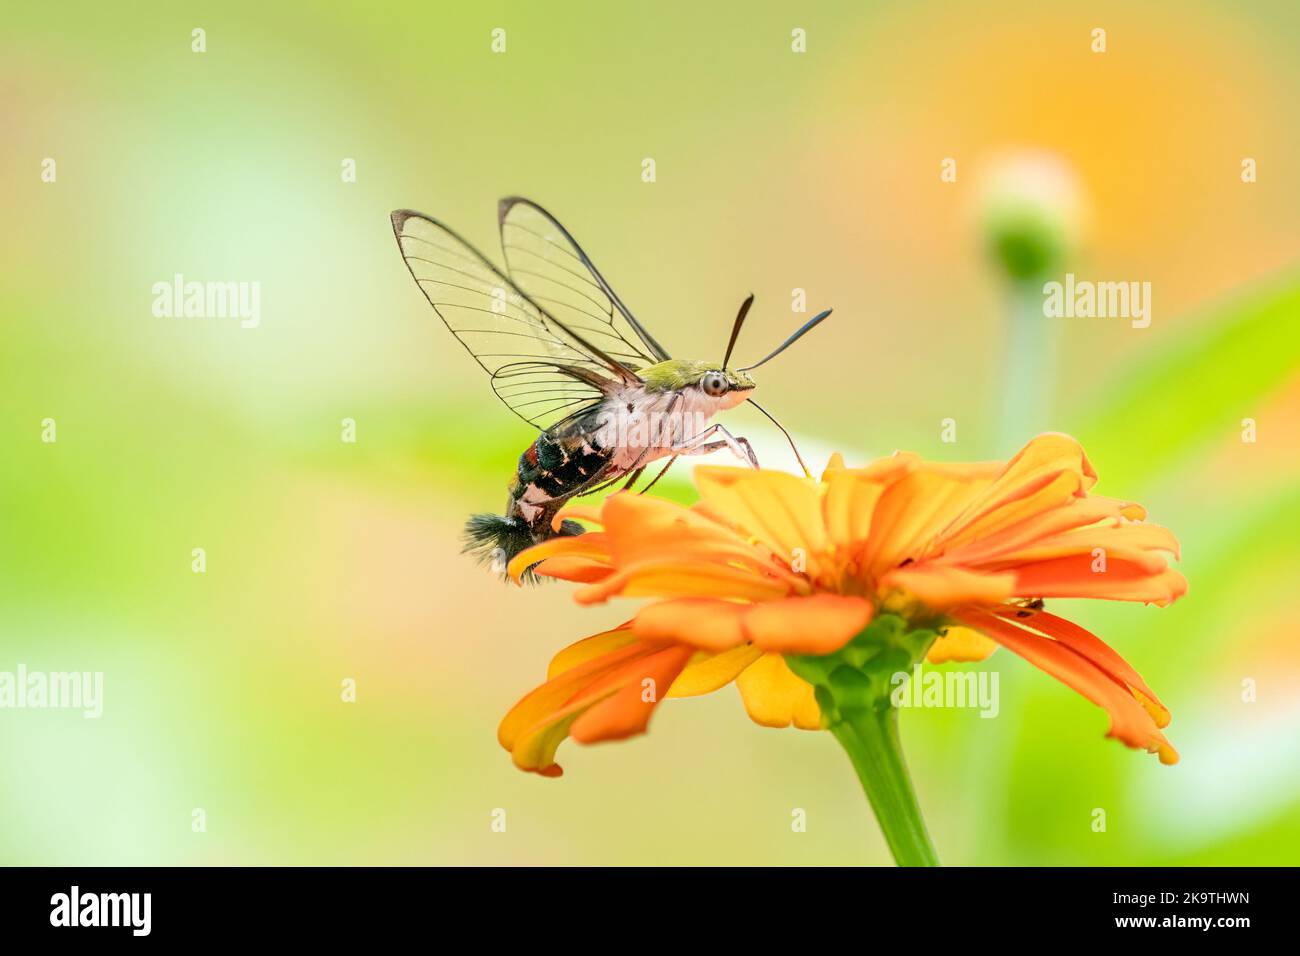 Close-up of a beautiful butterfly (Pellucid Hawk Moth) sitting a leave / flower during spring time on a sunny day Stock Photo